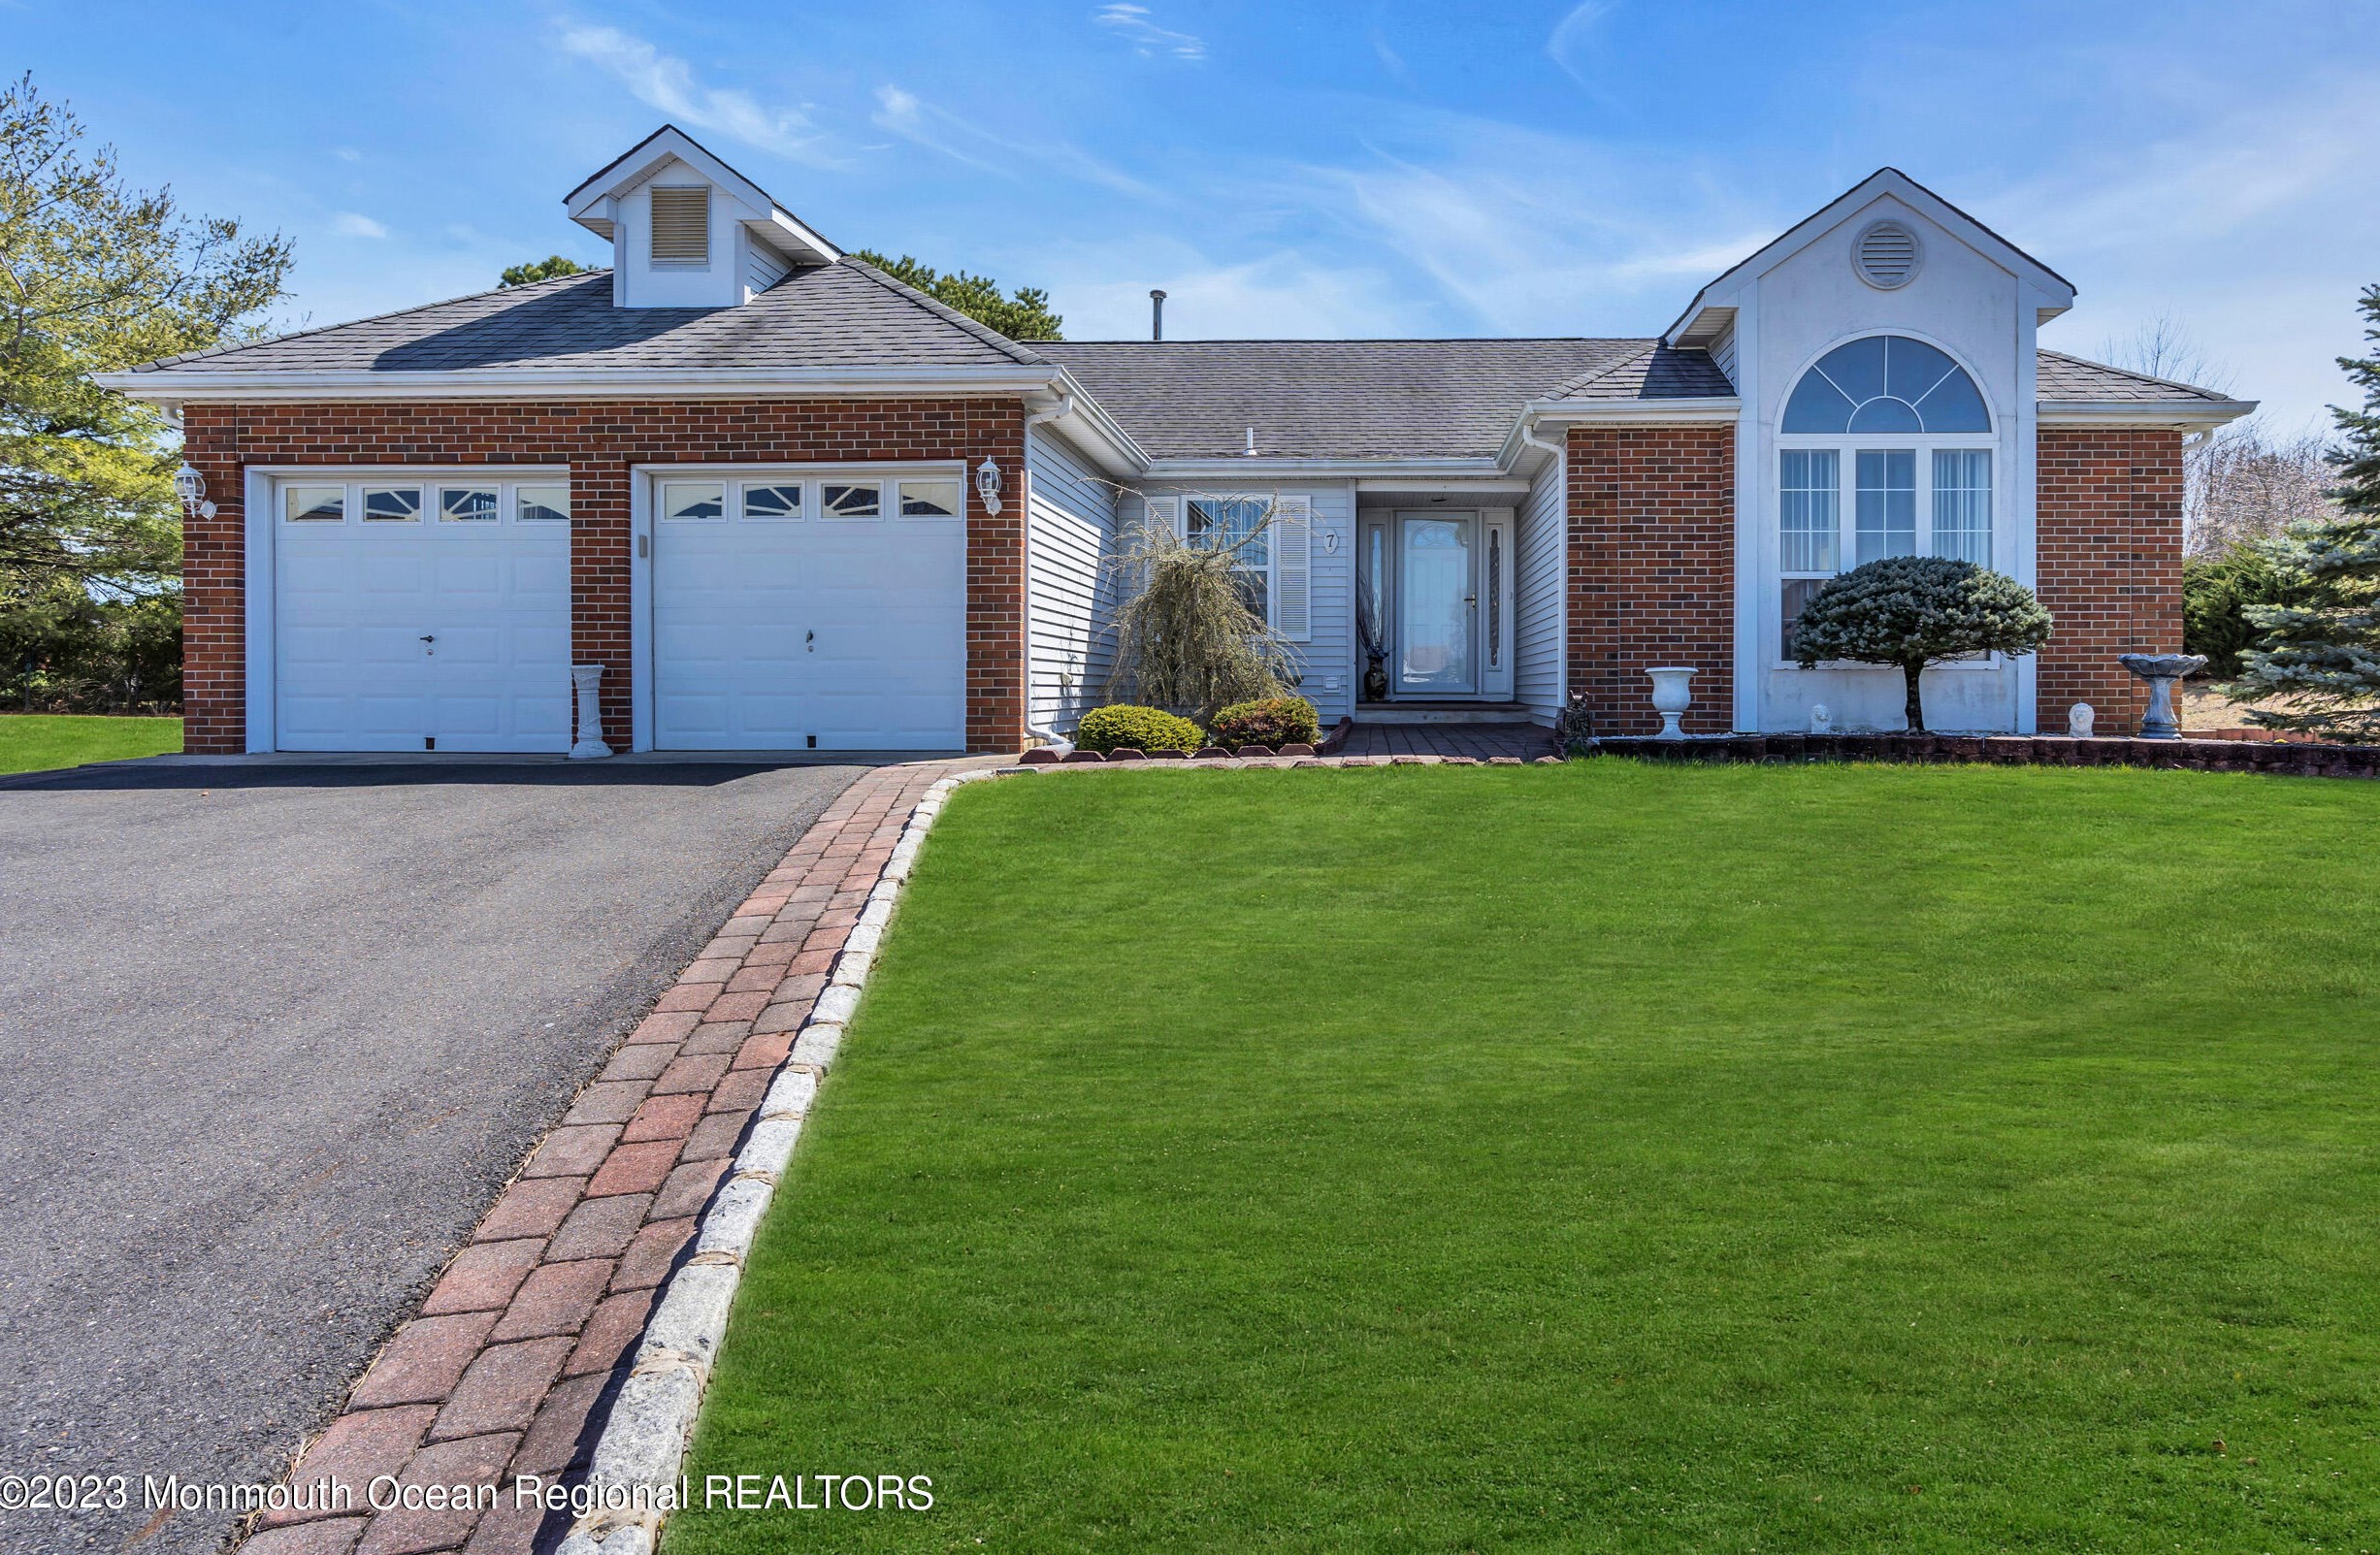 7 Rugby Ct, Toms River, NJ 08757